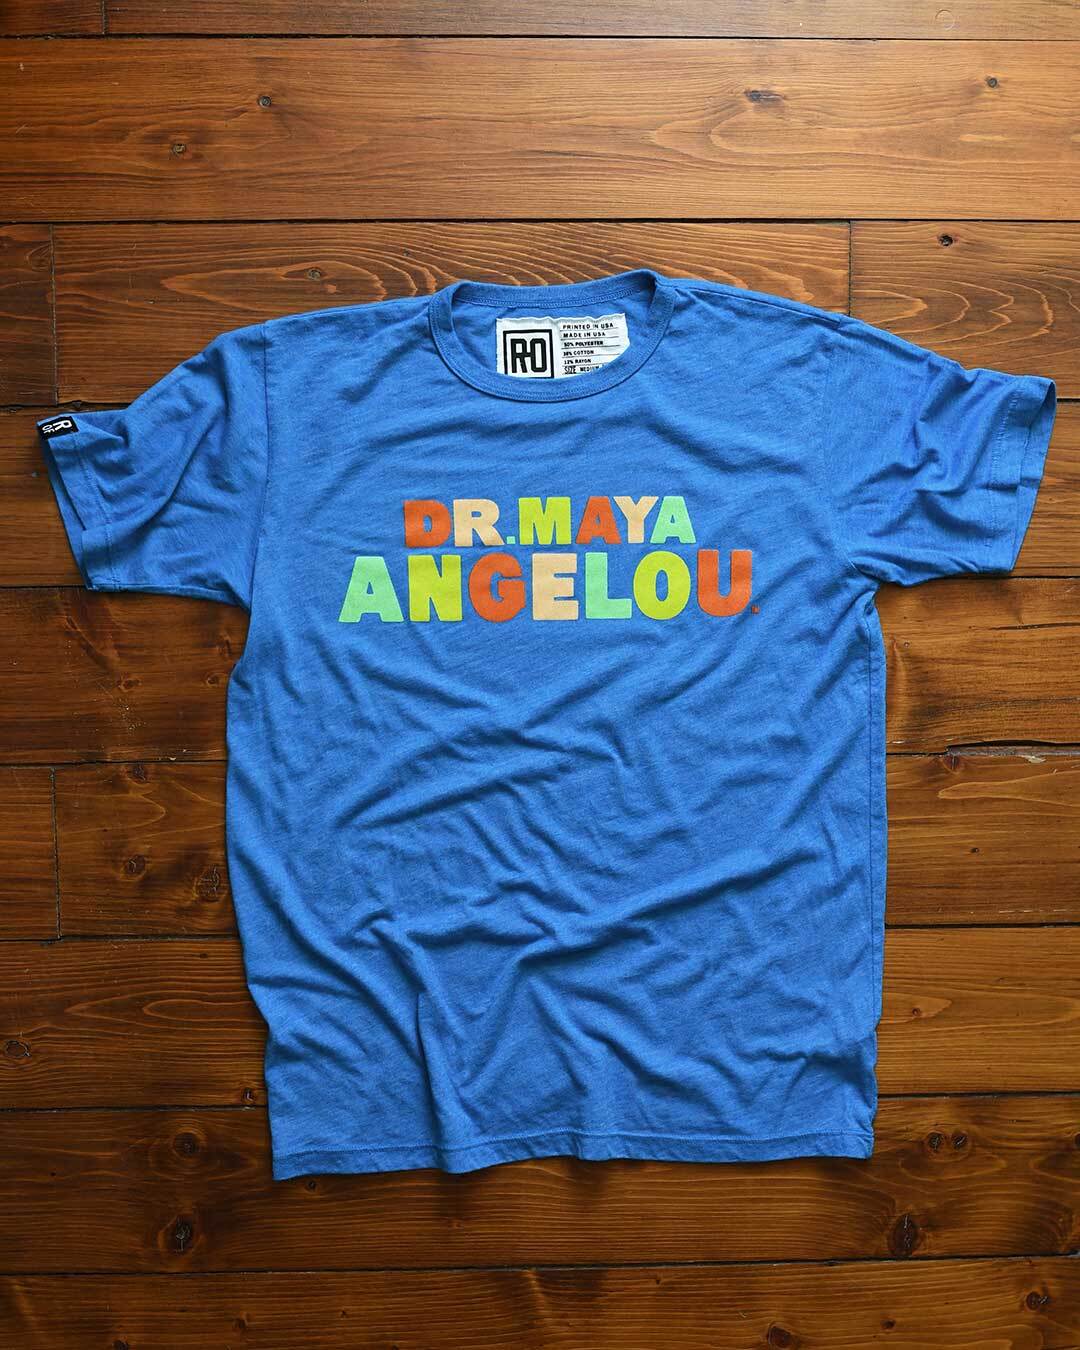 Triblend blue tee with &quot;DR. MAYA ANGELOU&quot; written in multicolour on the front.